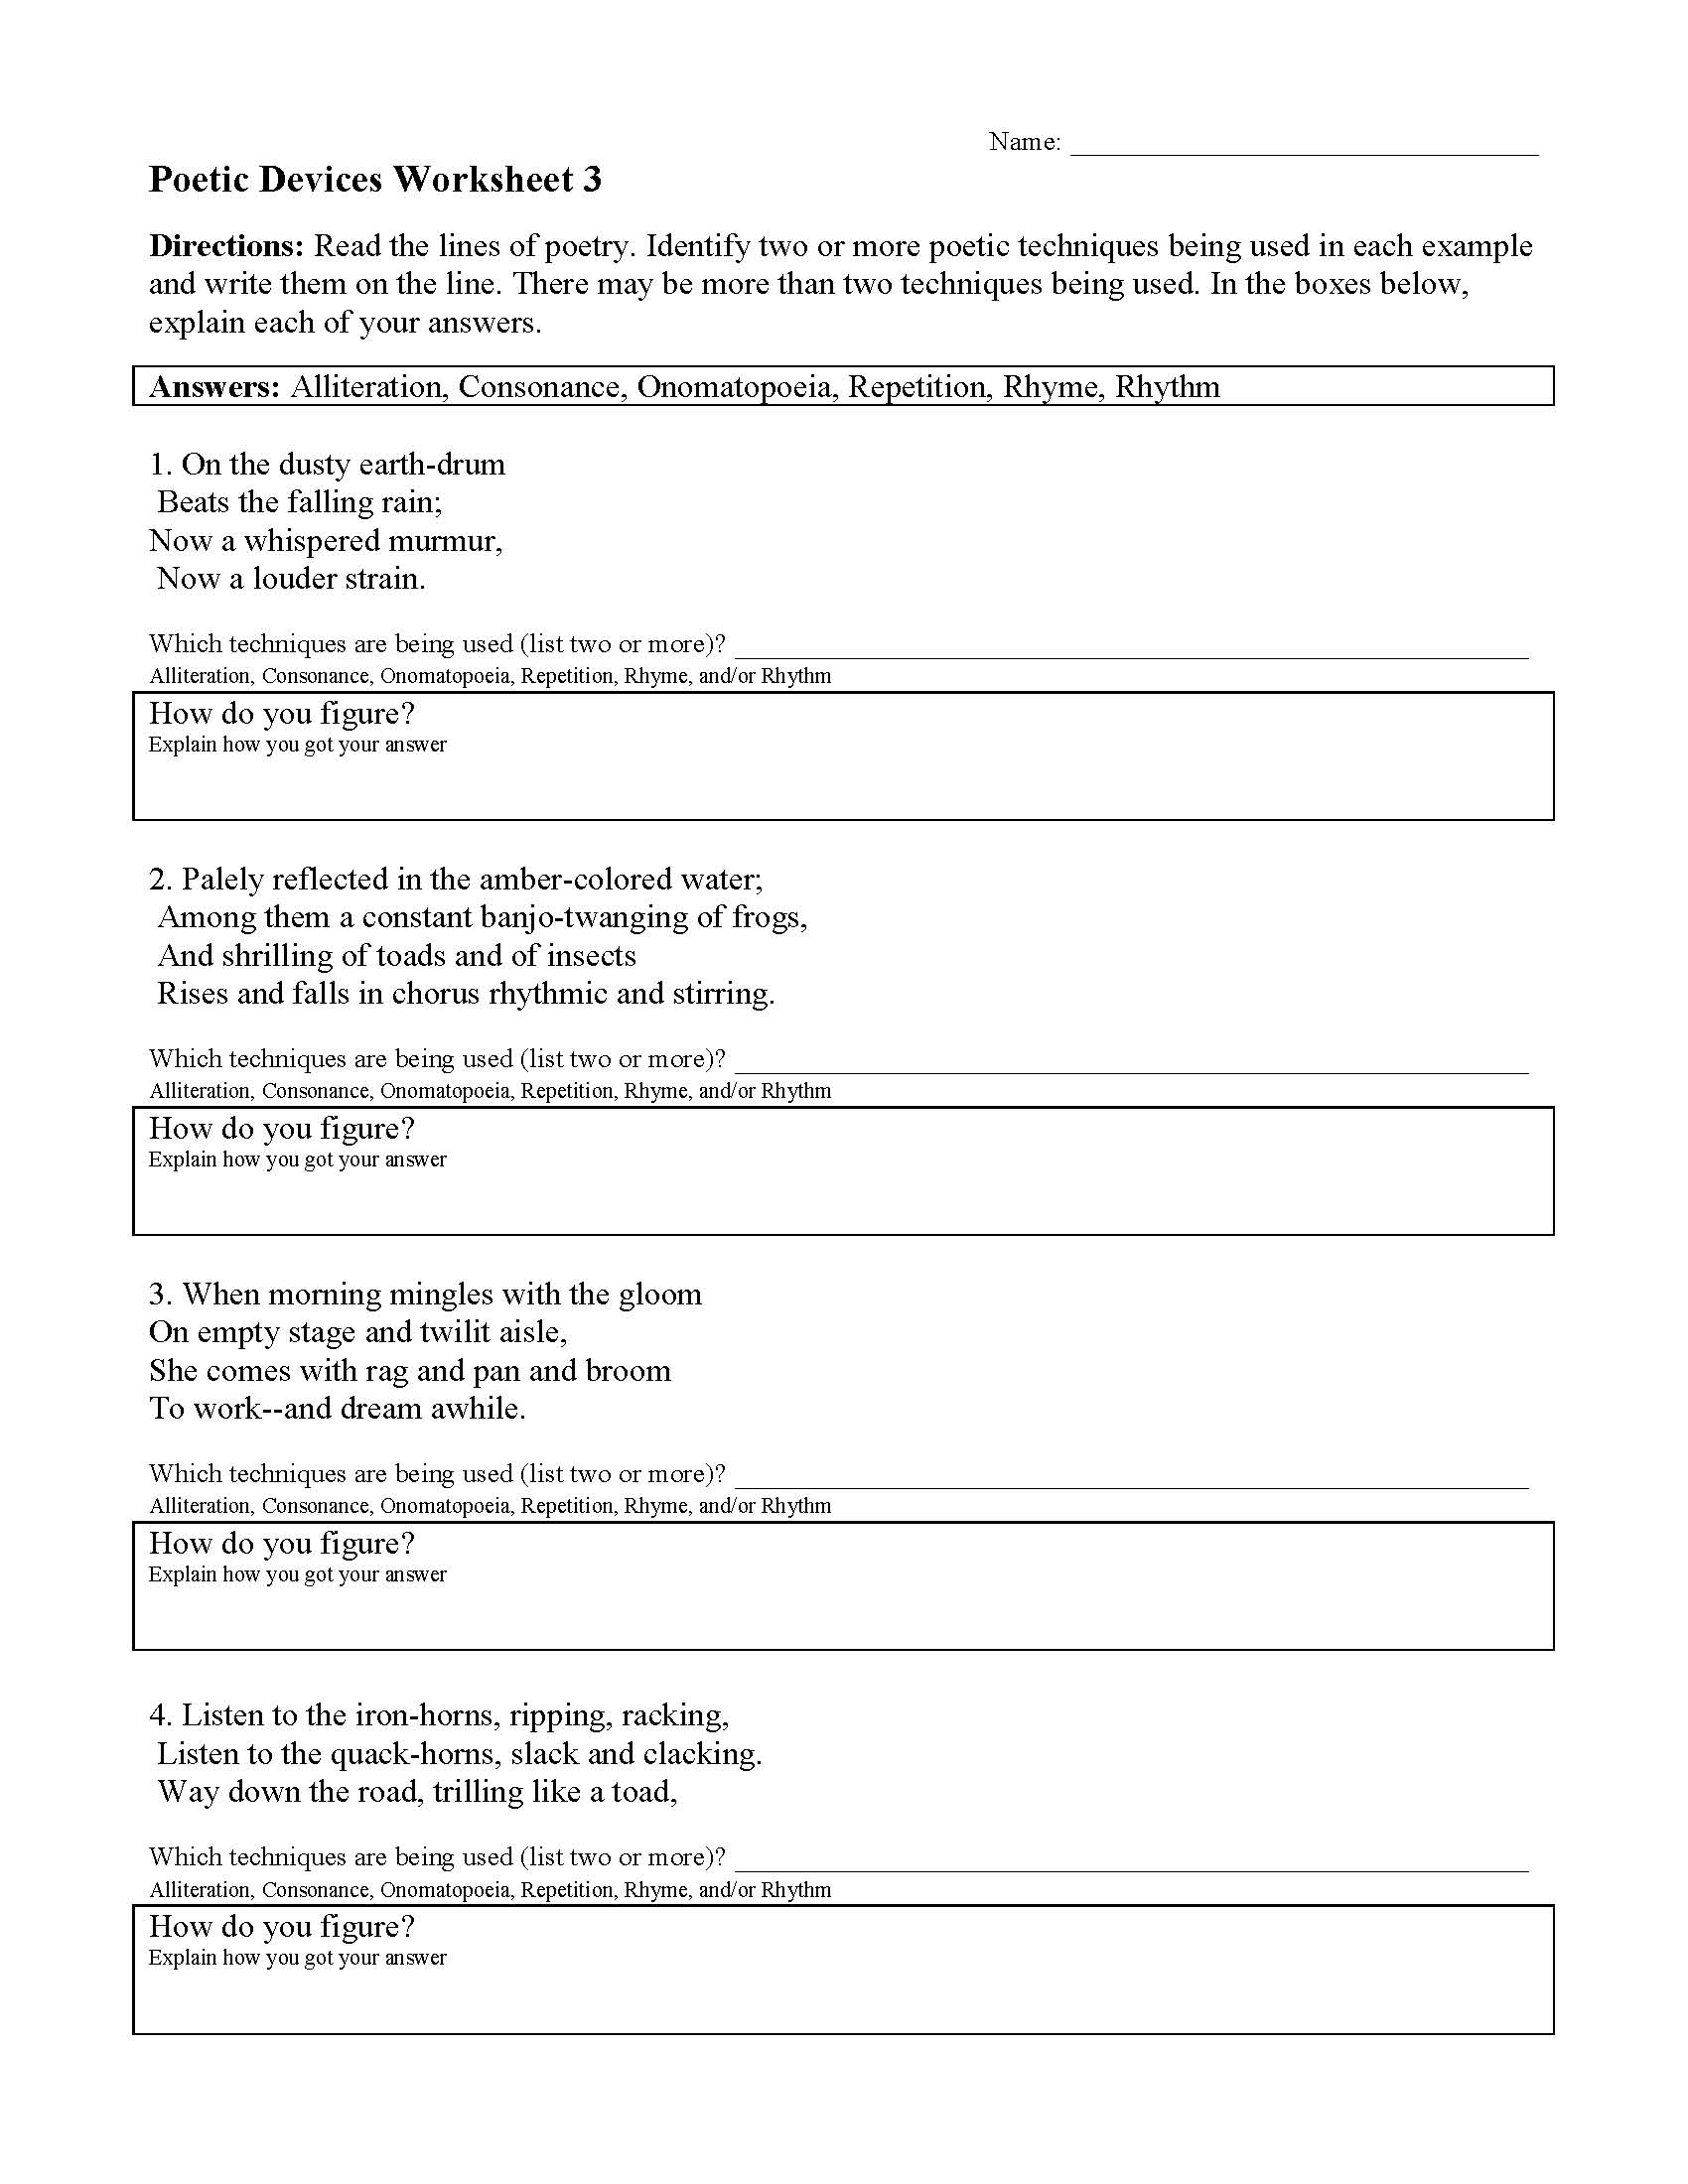 This is a preview image of Poetic Devices Worksheet 3. Click on it to enlarge it or view the source file.